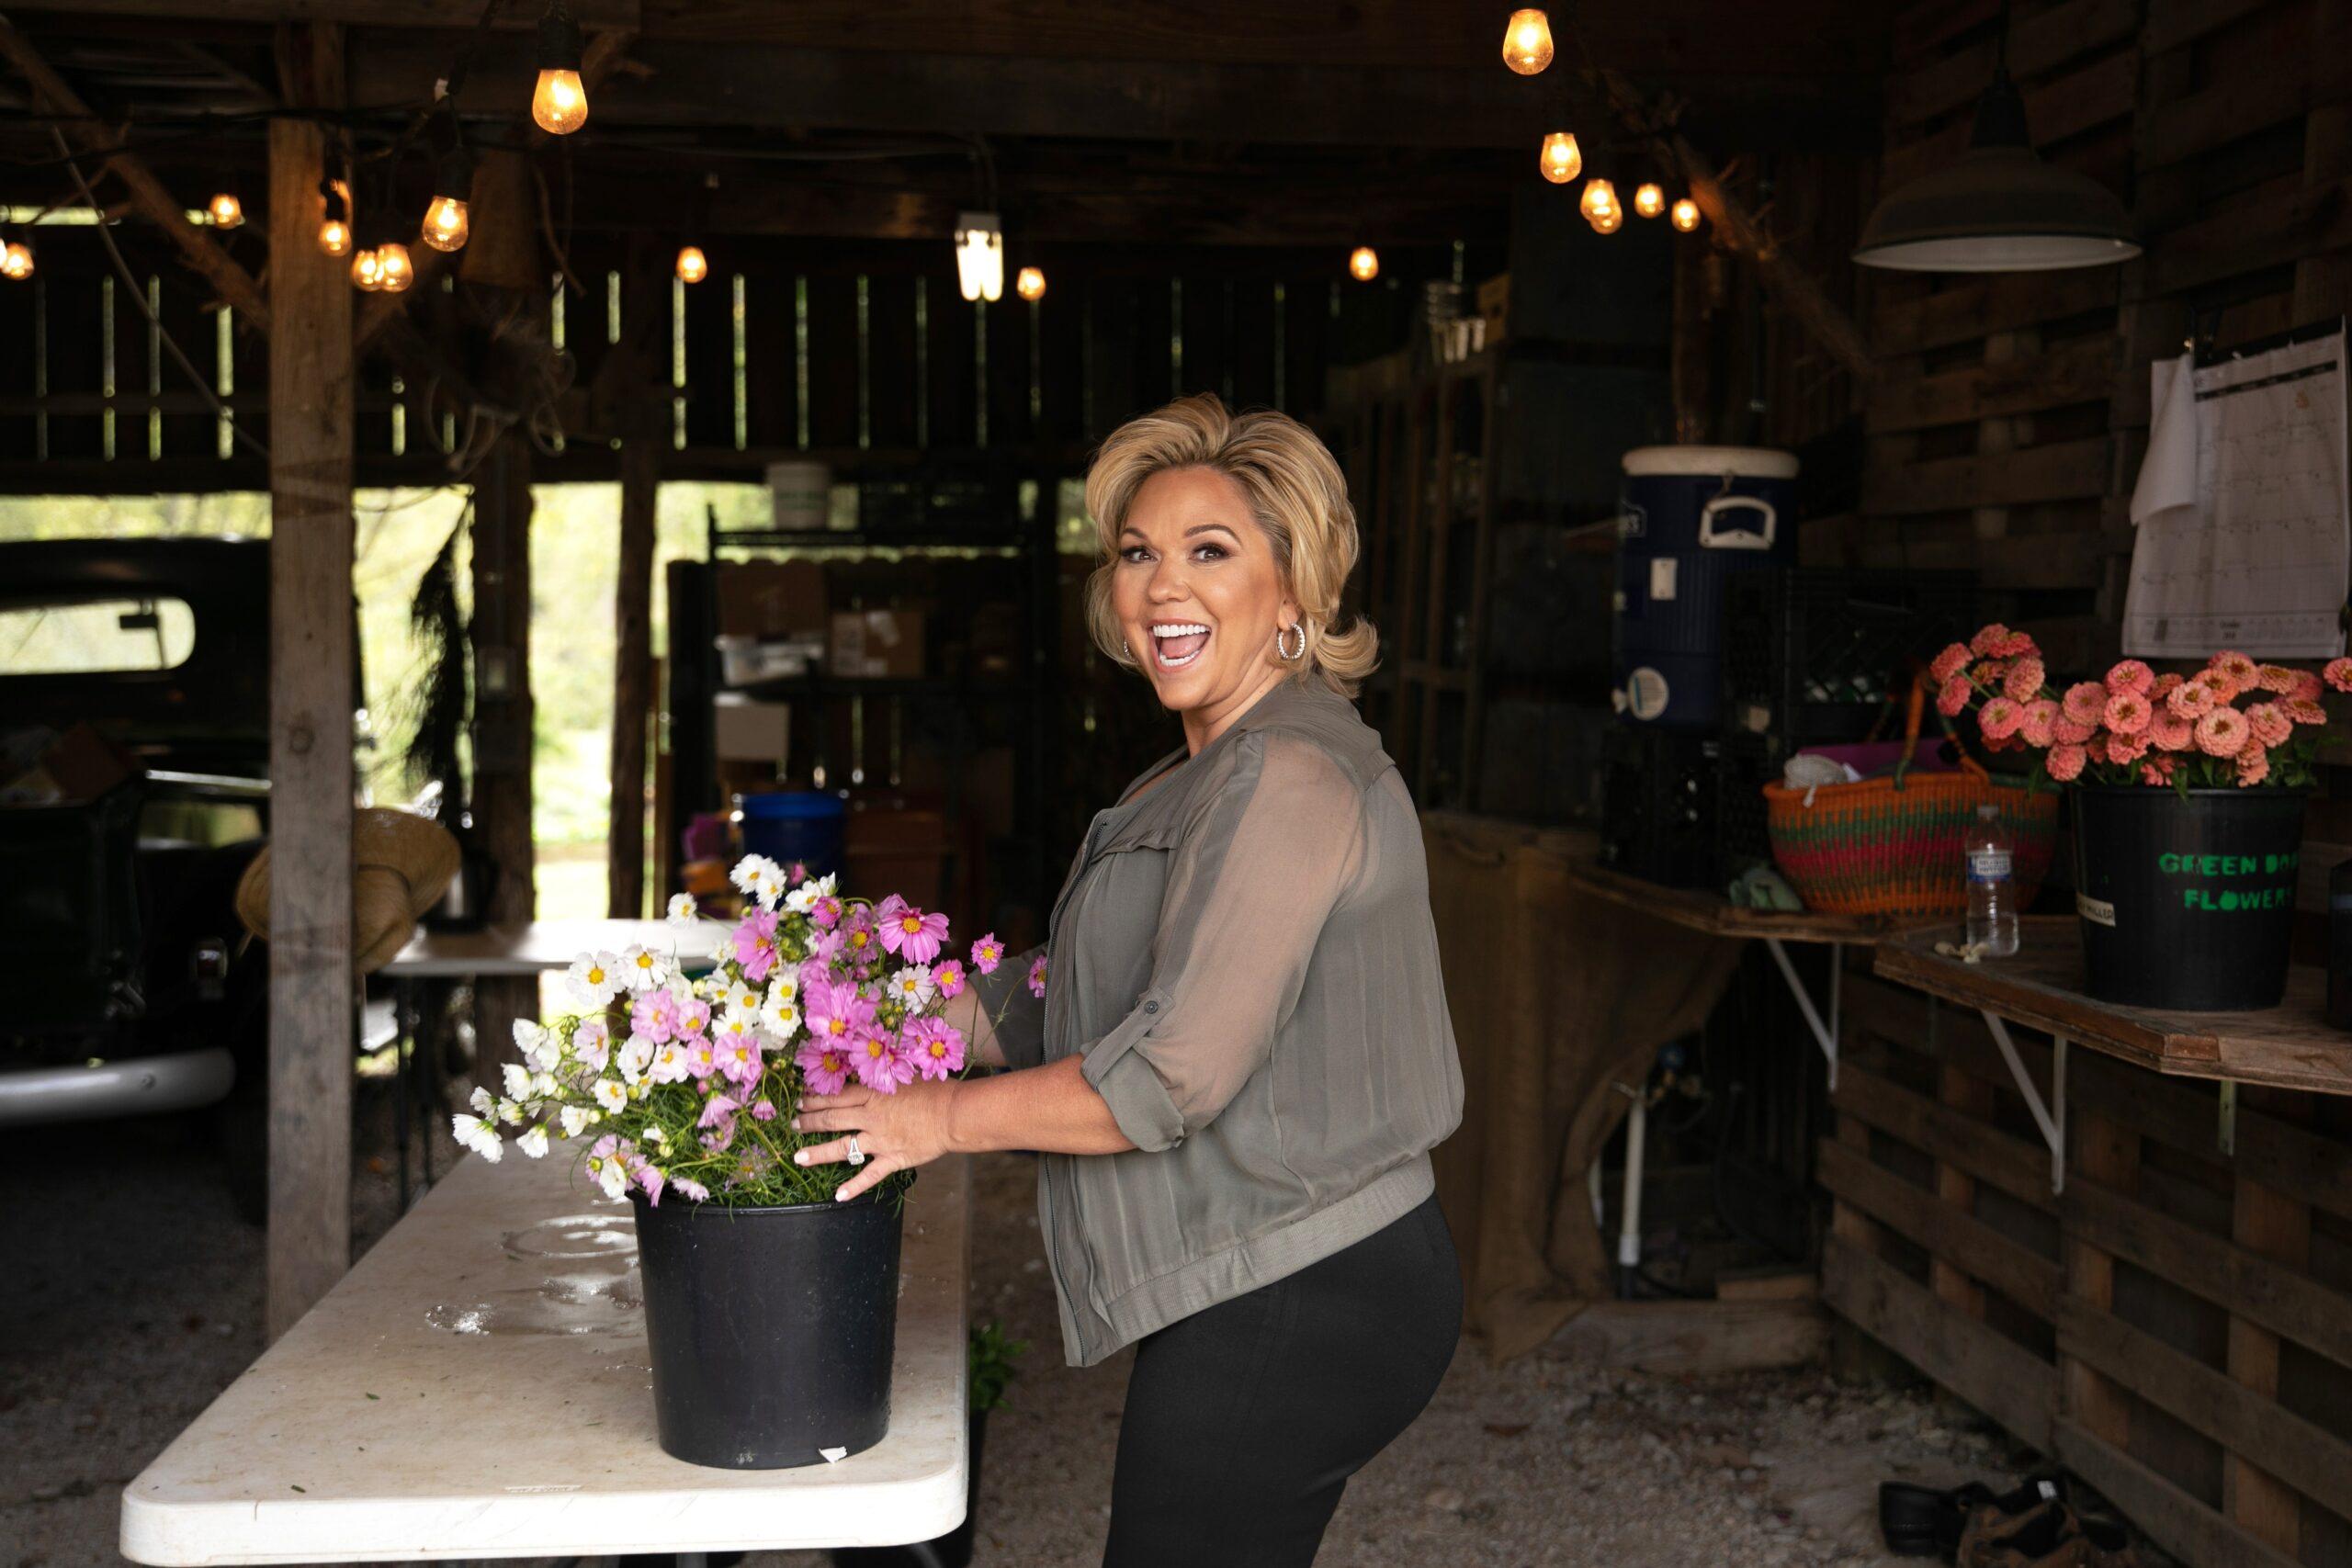 Reality star Julie Chrisley shows off her slimmed down figure after losing 20lbs